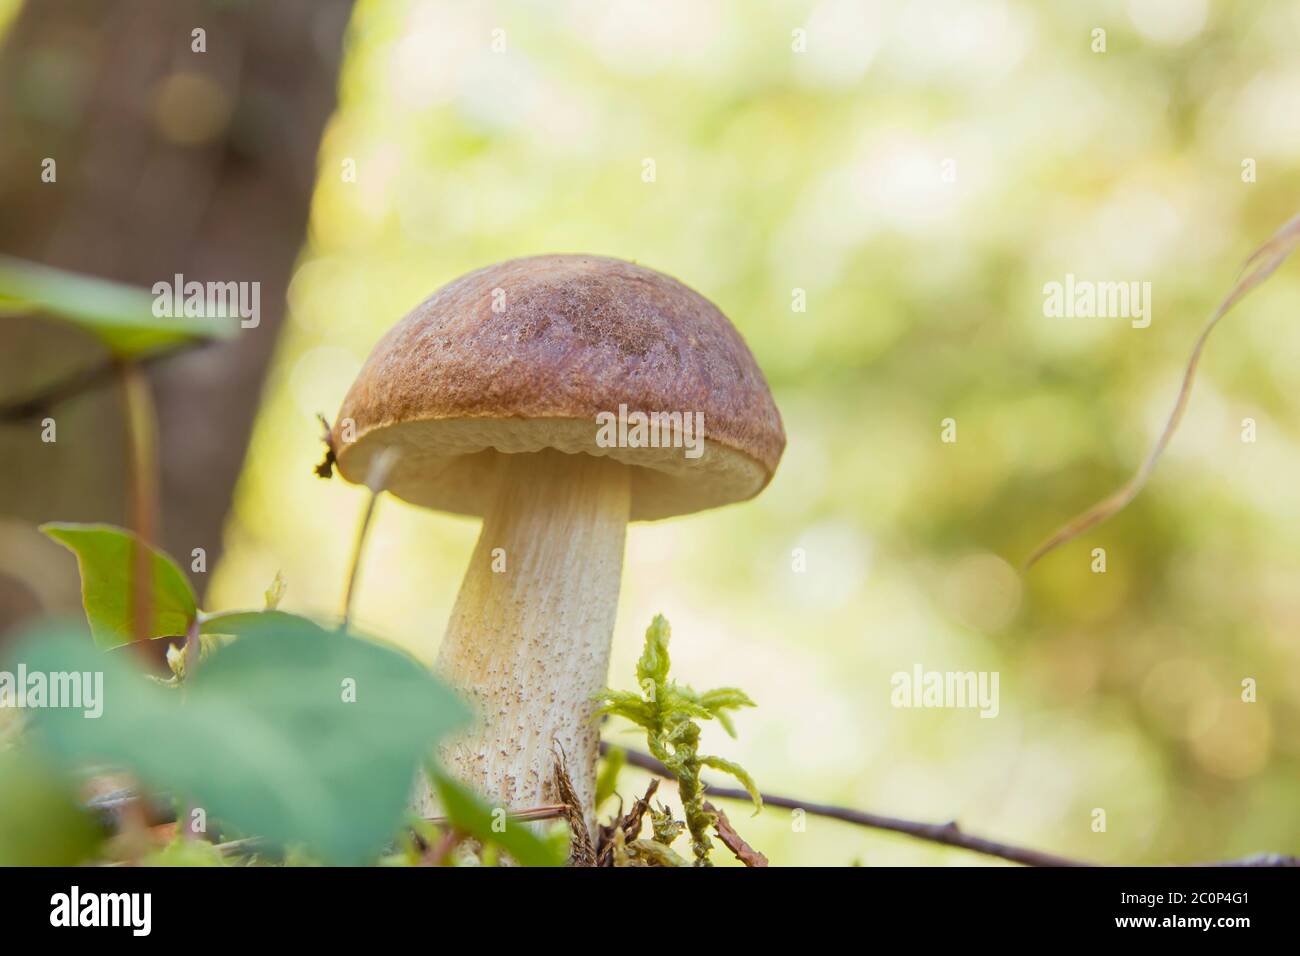 Small bolete mushroom growing wild in the autumnal forest Stock Photo